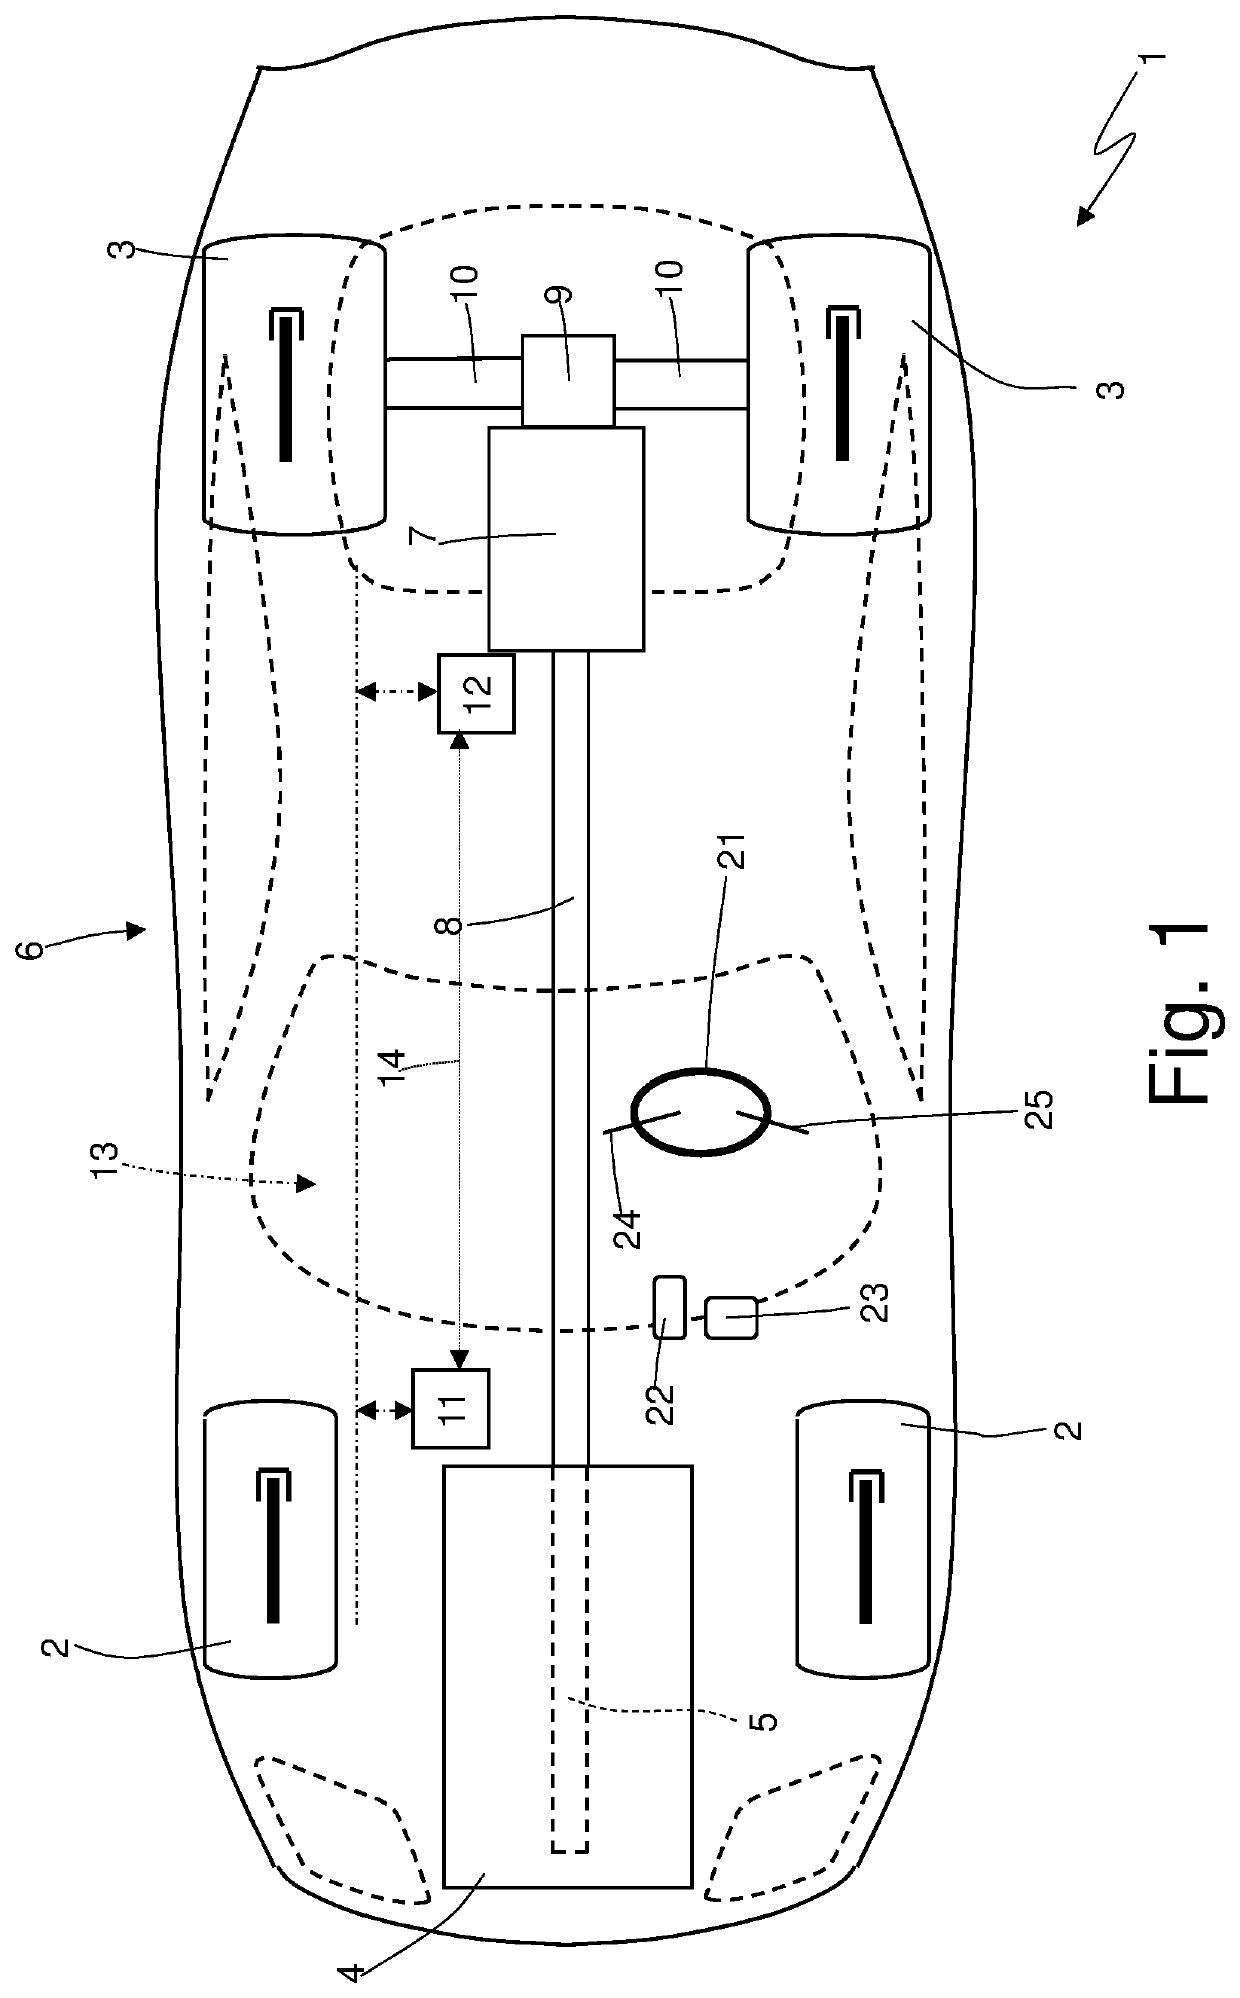 Method to control a road vehicle with a microslip of the clutch